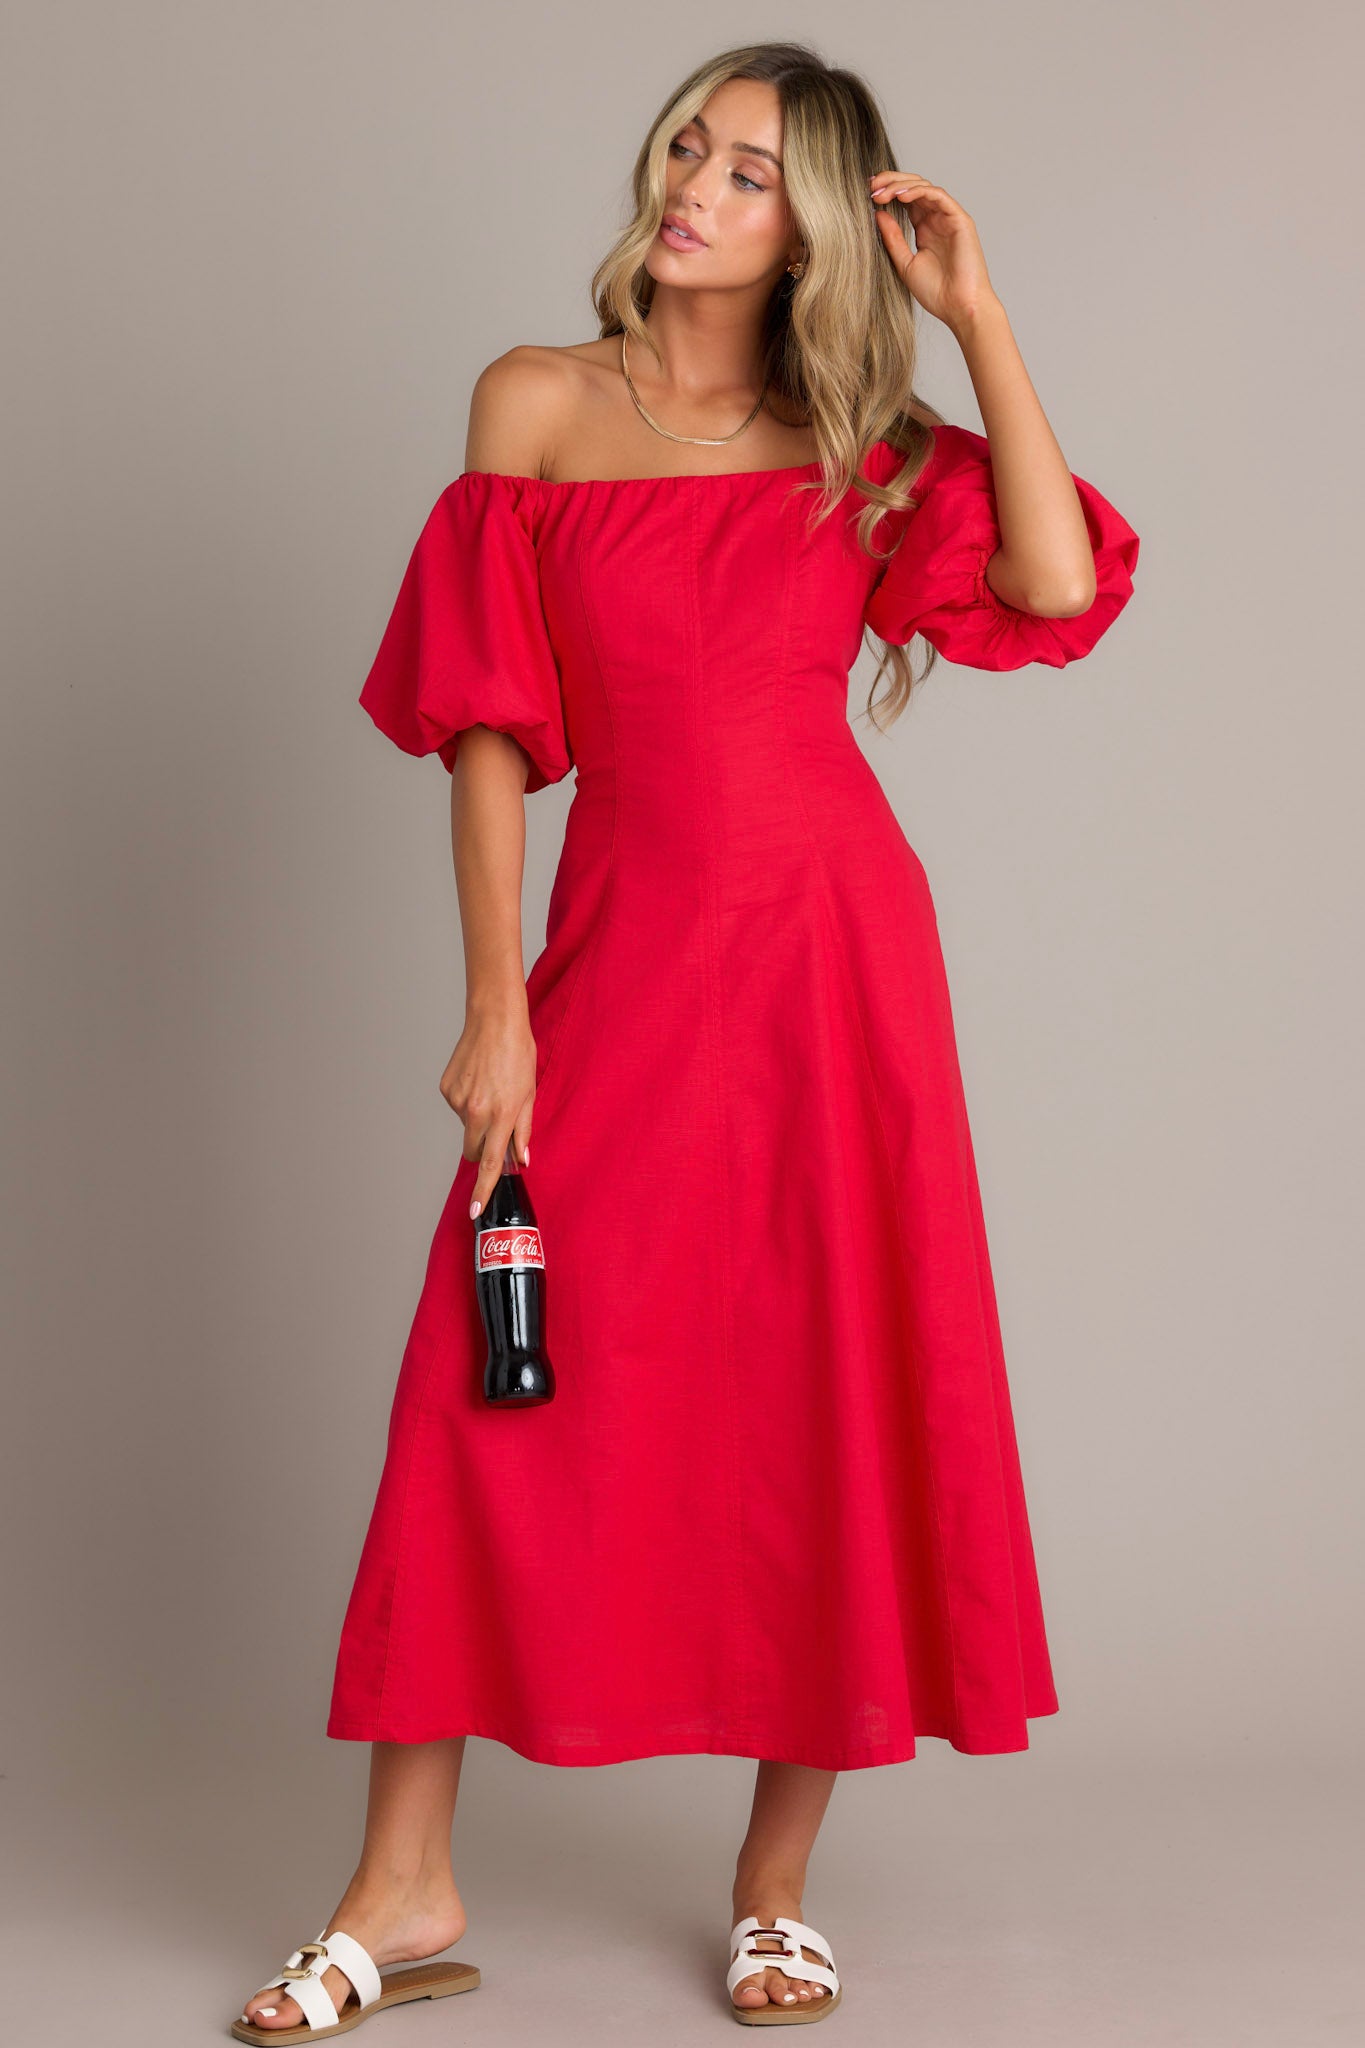 Off-the-shoulder red dress featuring puffed sleeves and a fitted bodice that flares out into a flowy, ankle-length skirt.